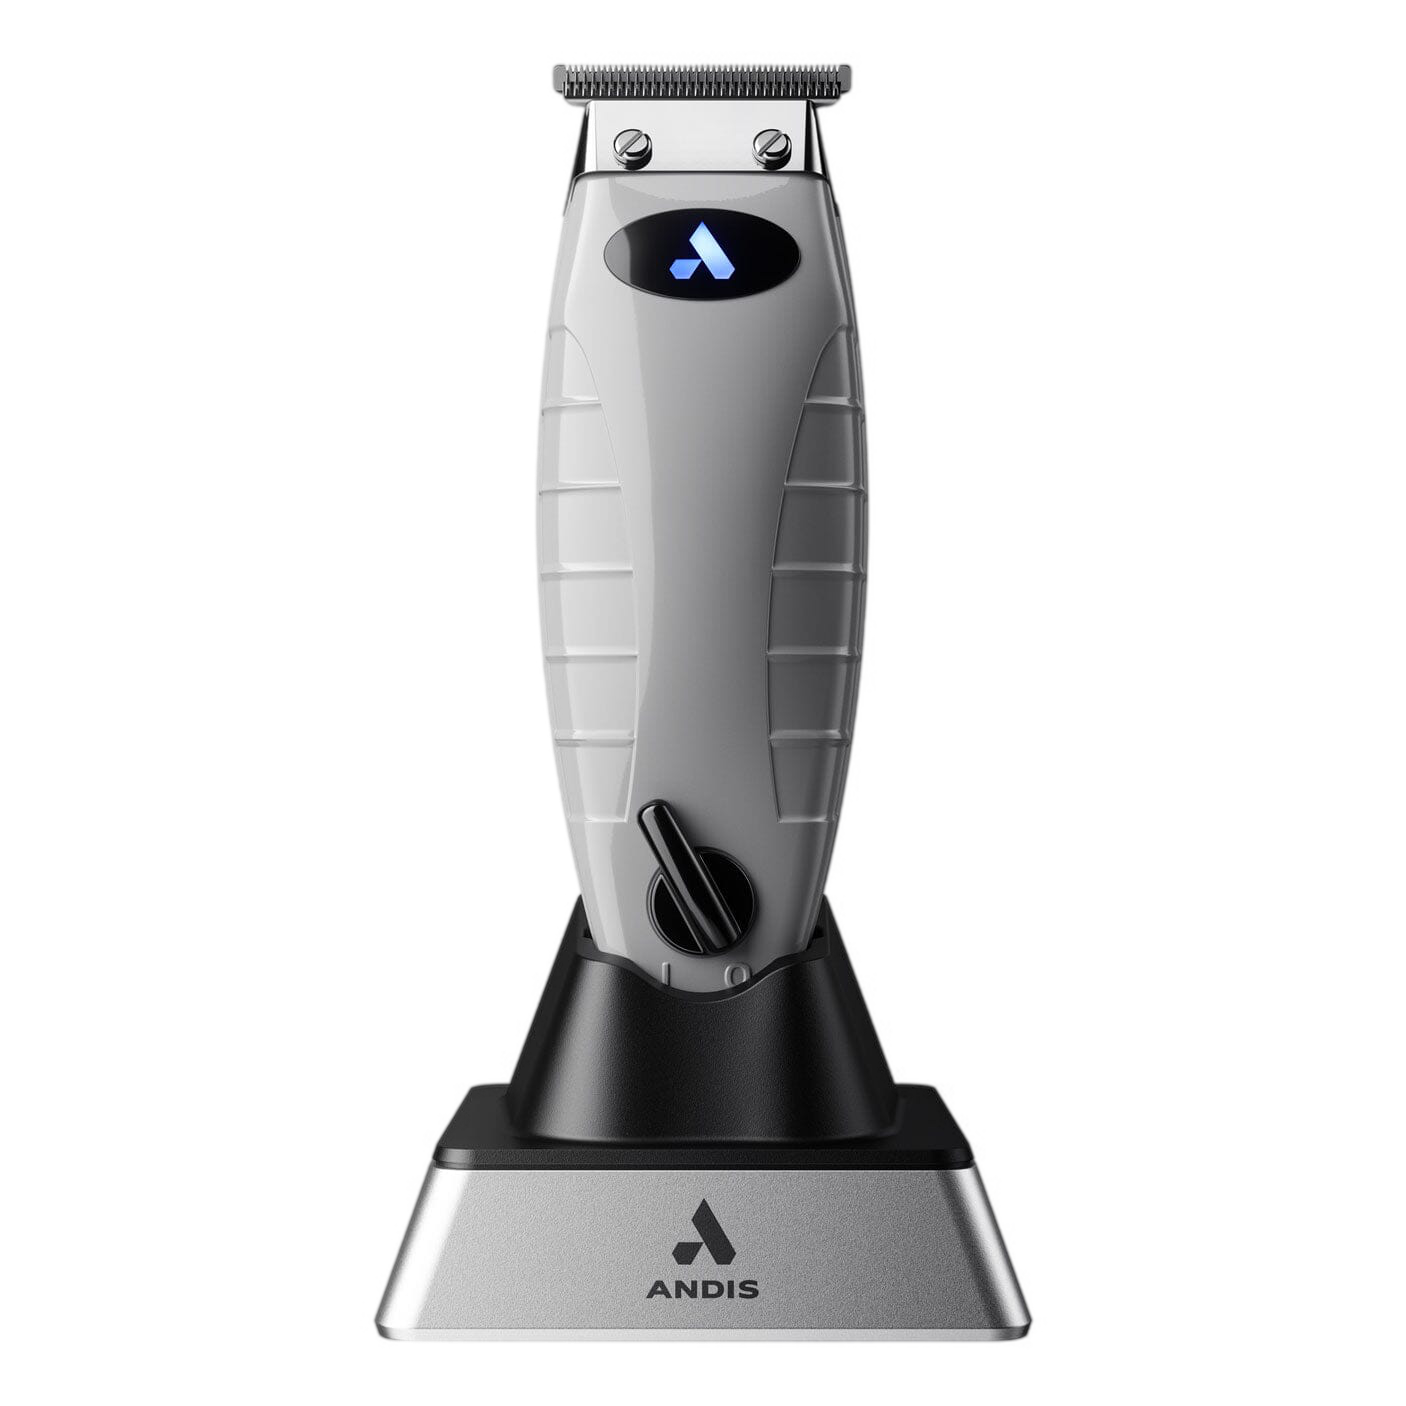 Andis Cordless T-Outliner Lithium T-outliner